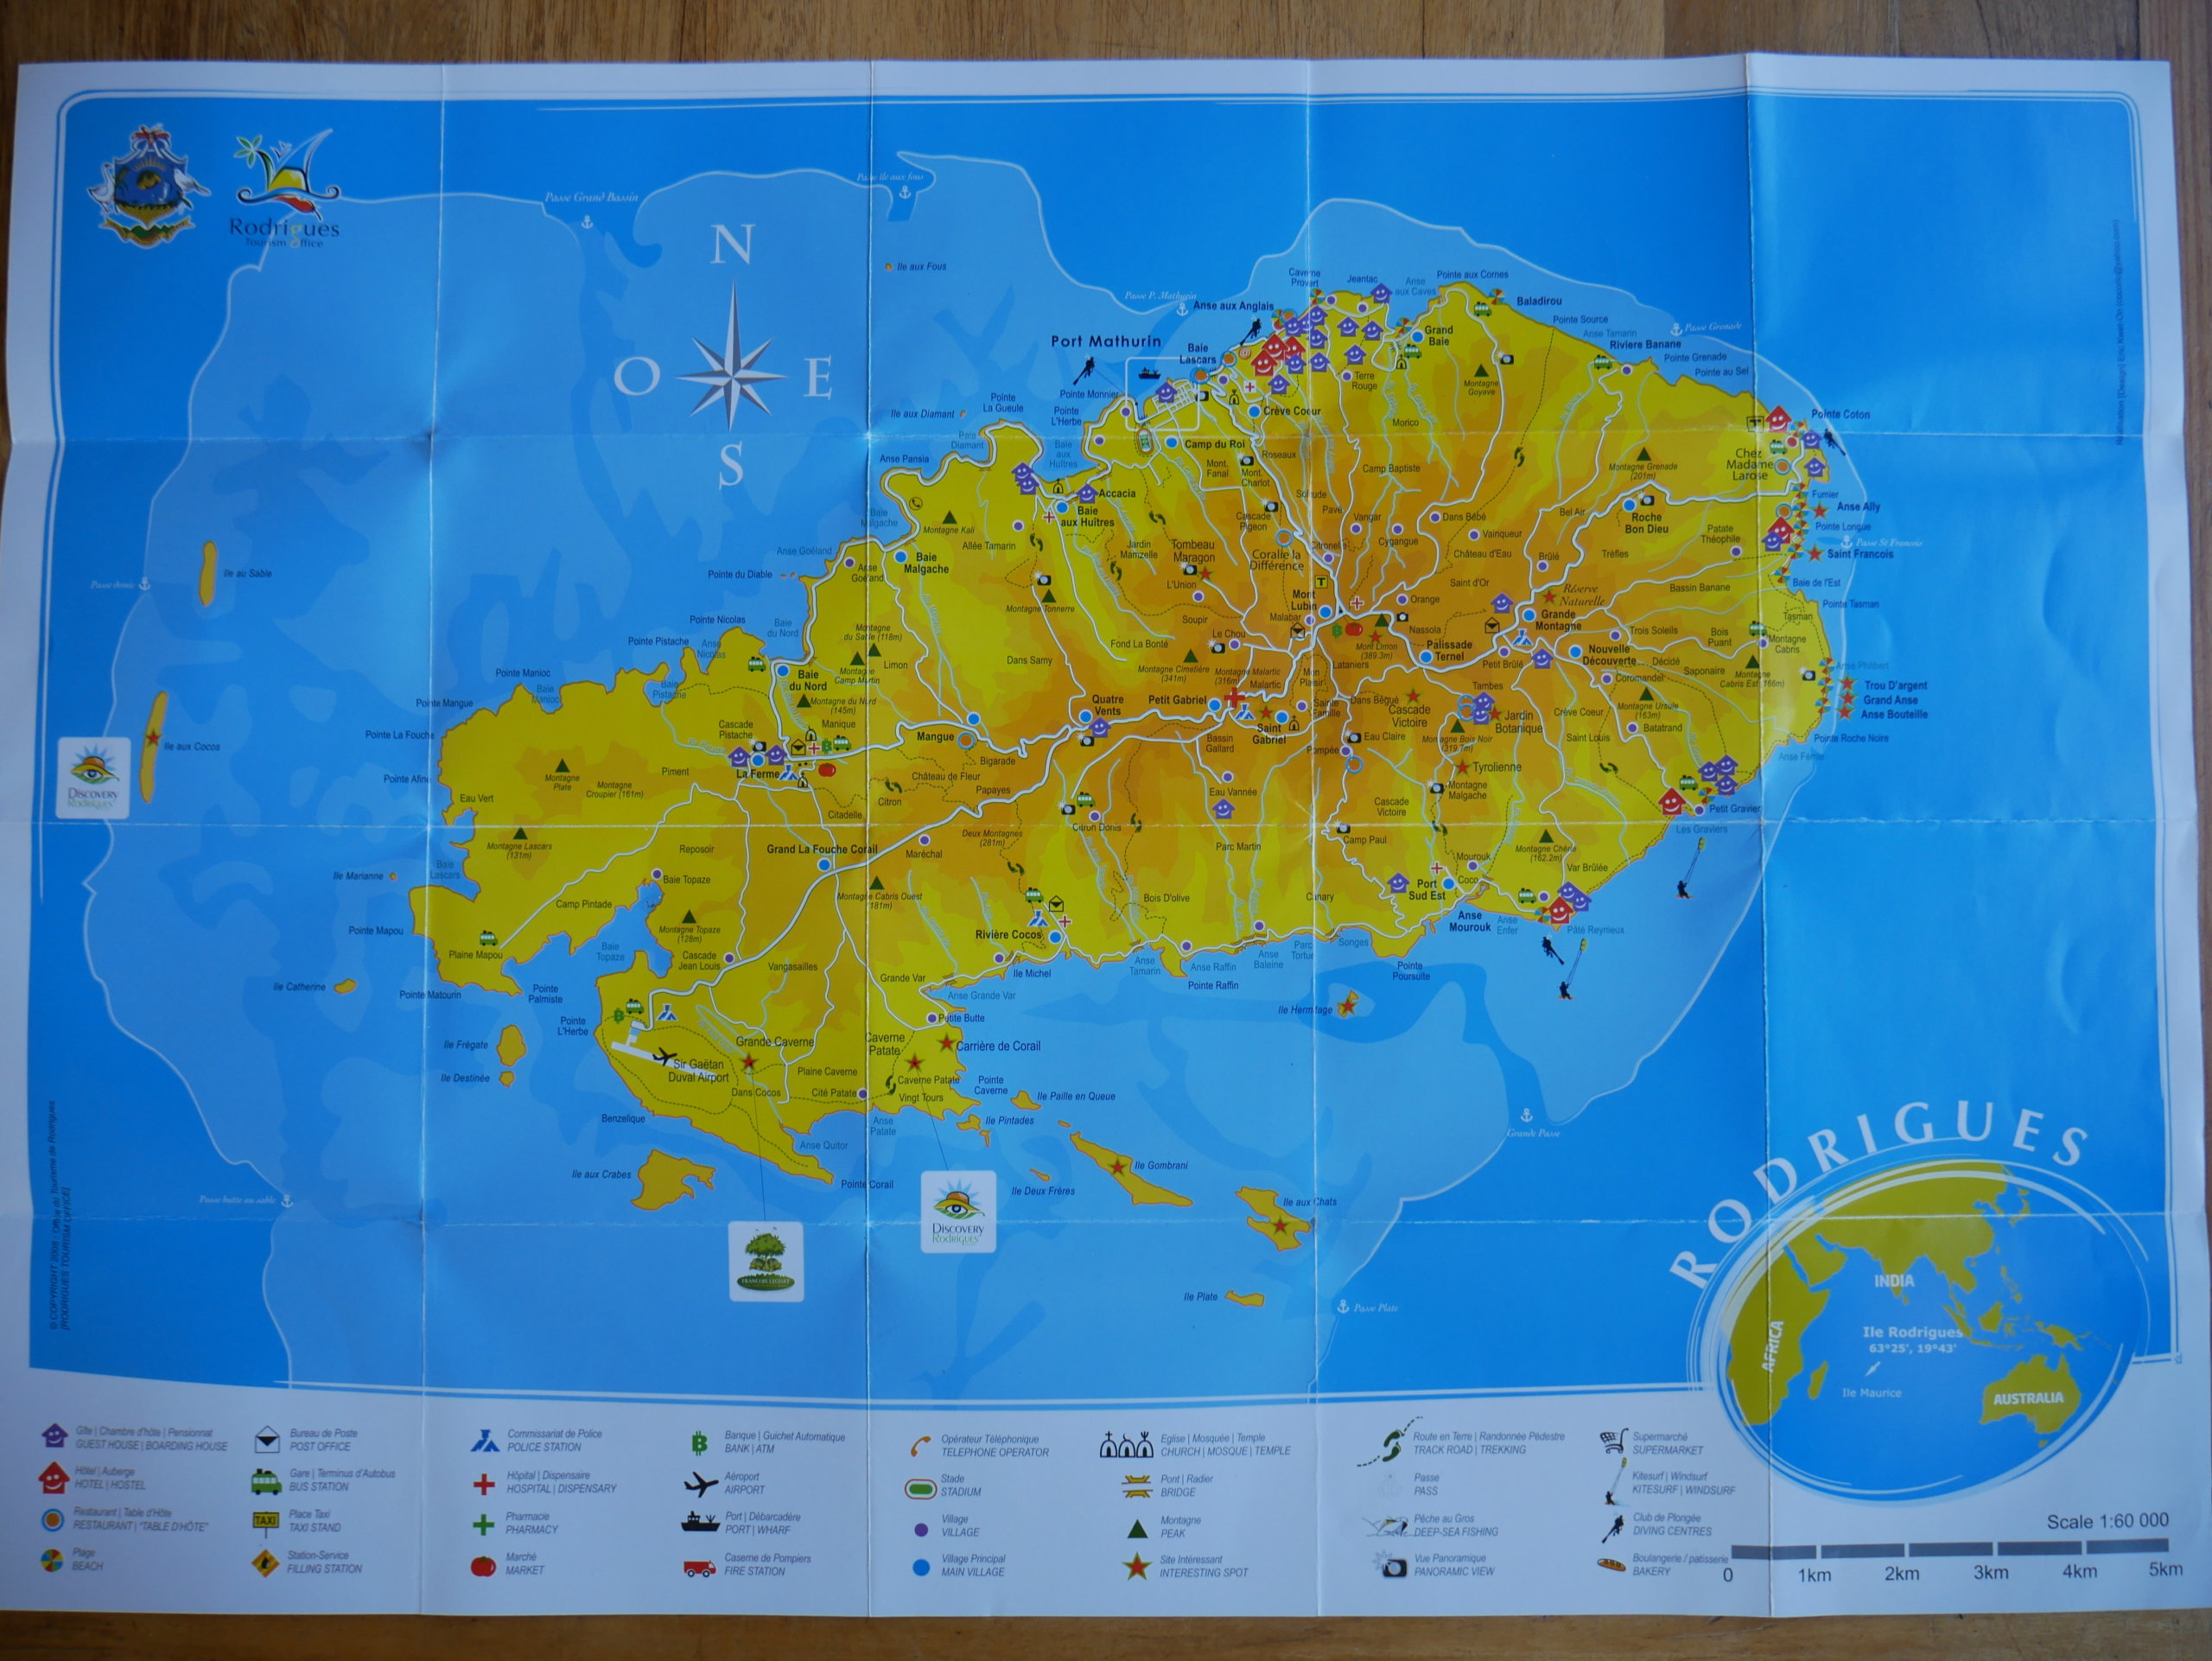 Rodrigues tourism office map for free zoomed out